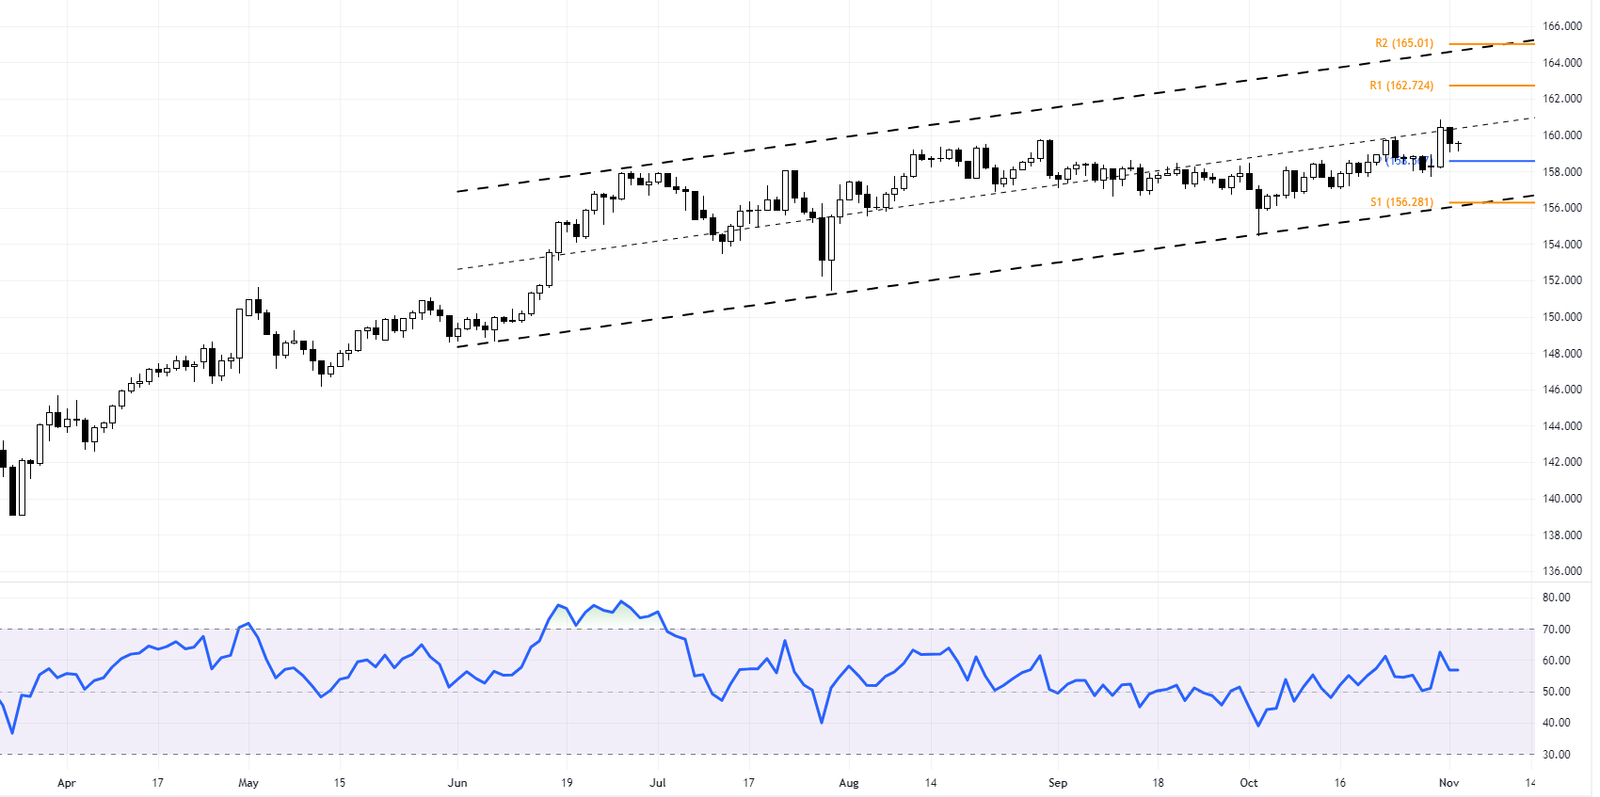 EURJPY Technical Analysis - Bank of Japan's Stance